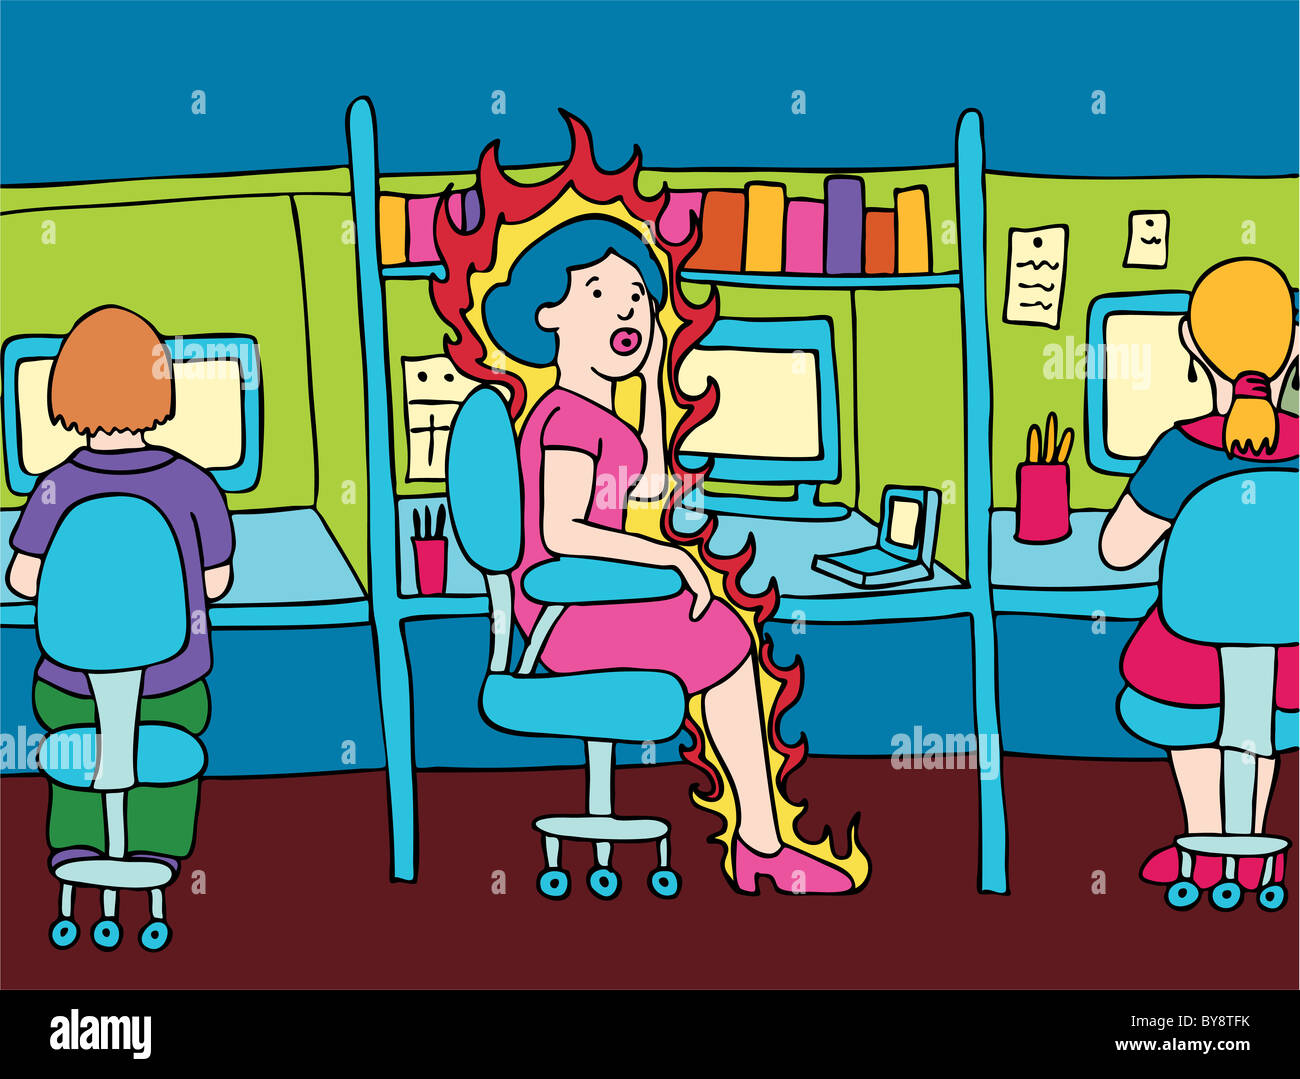 Menopausal woman experiences a hot flash while at work. Stock Photo